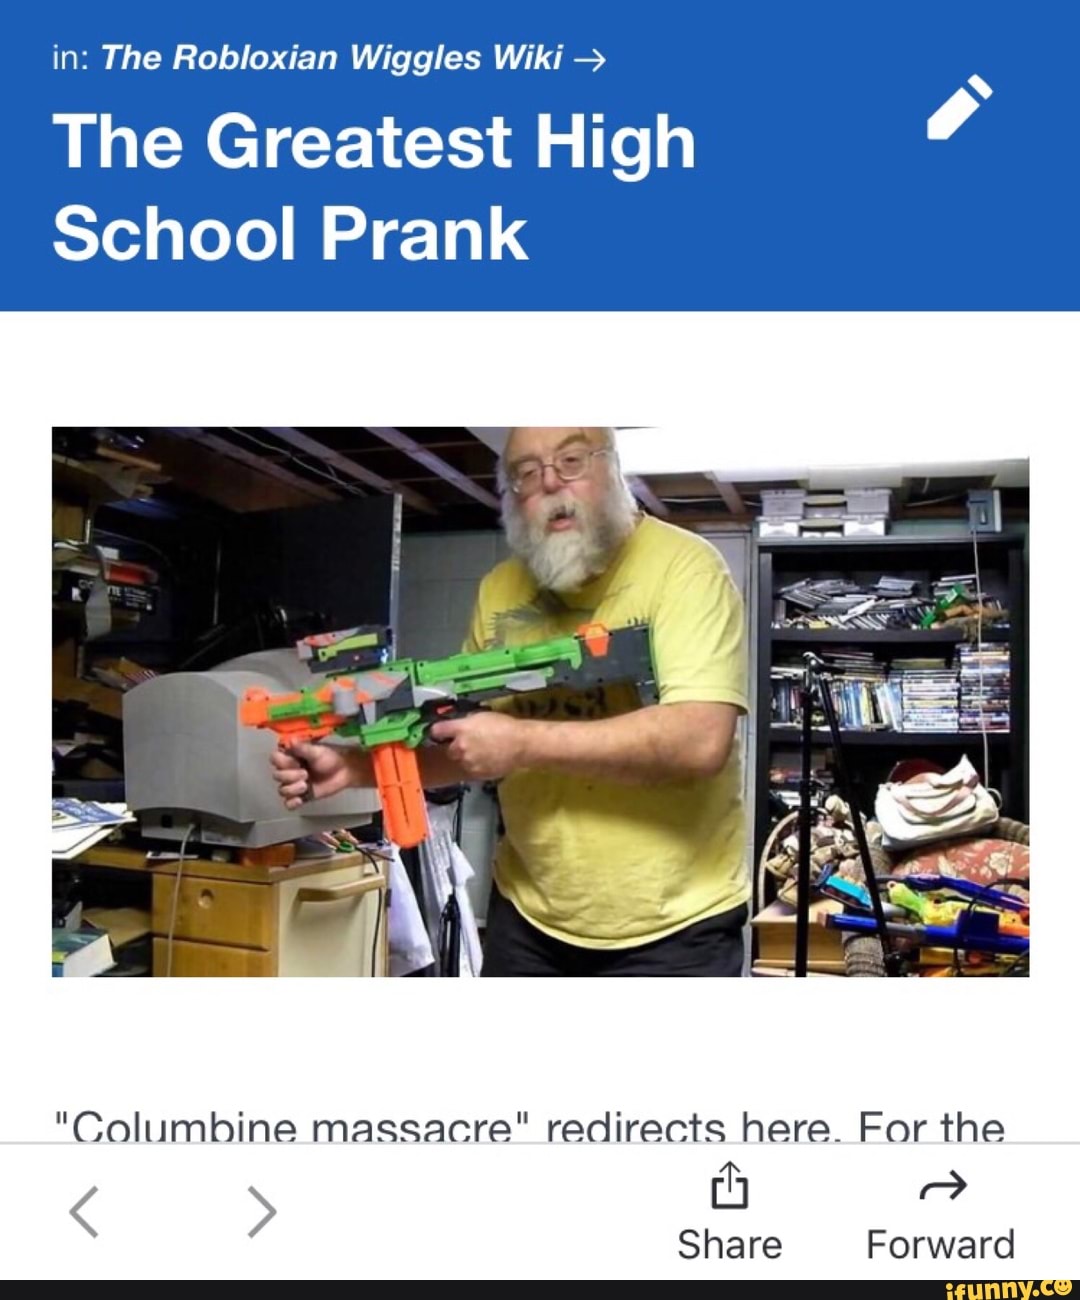 In The Robloxian Wiggles Wiki The Greatest High School Prank